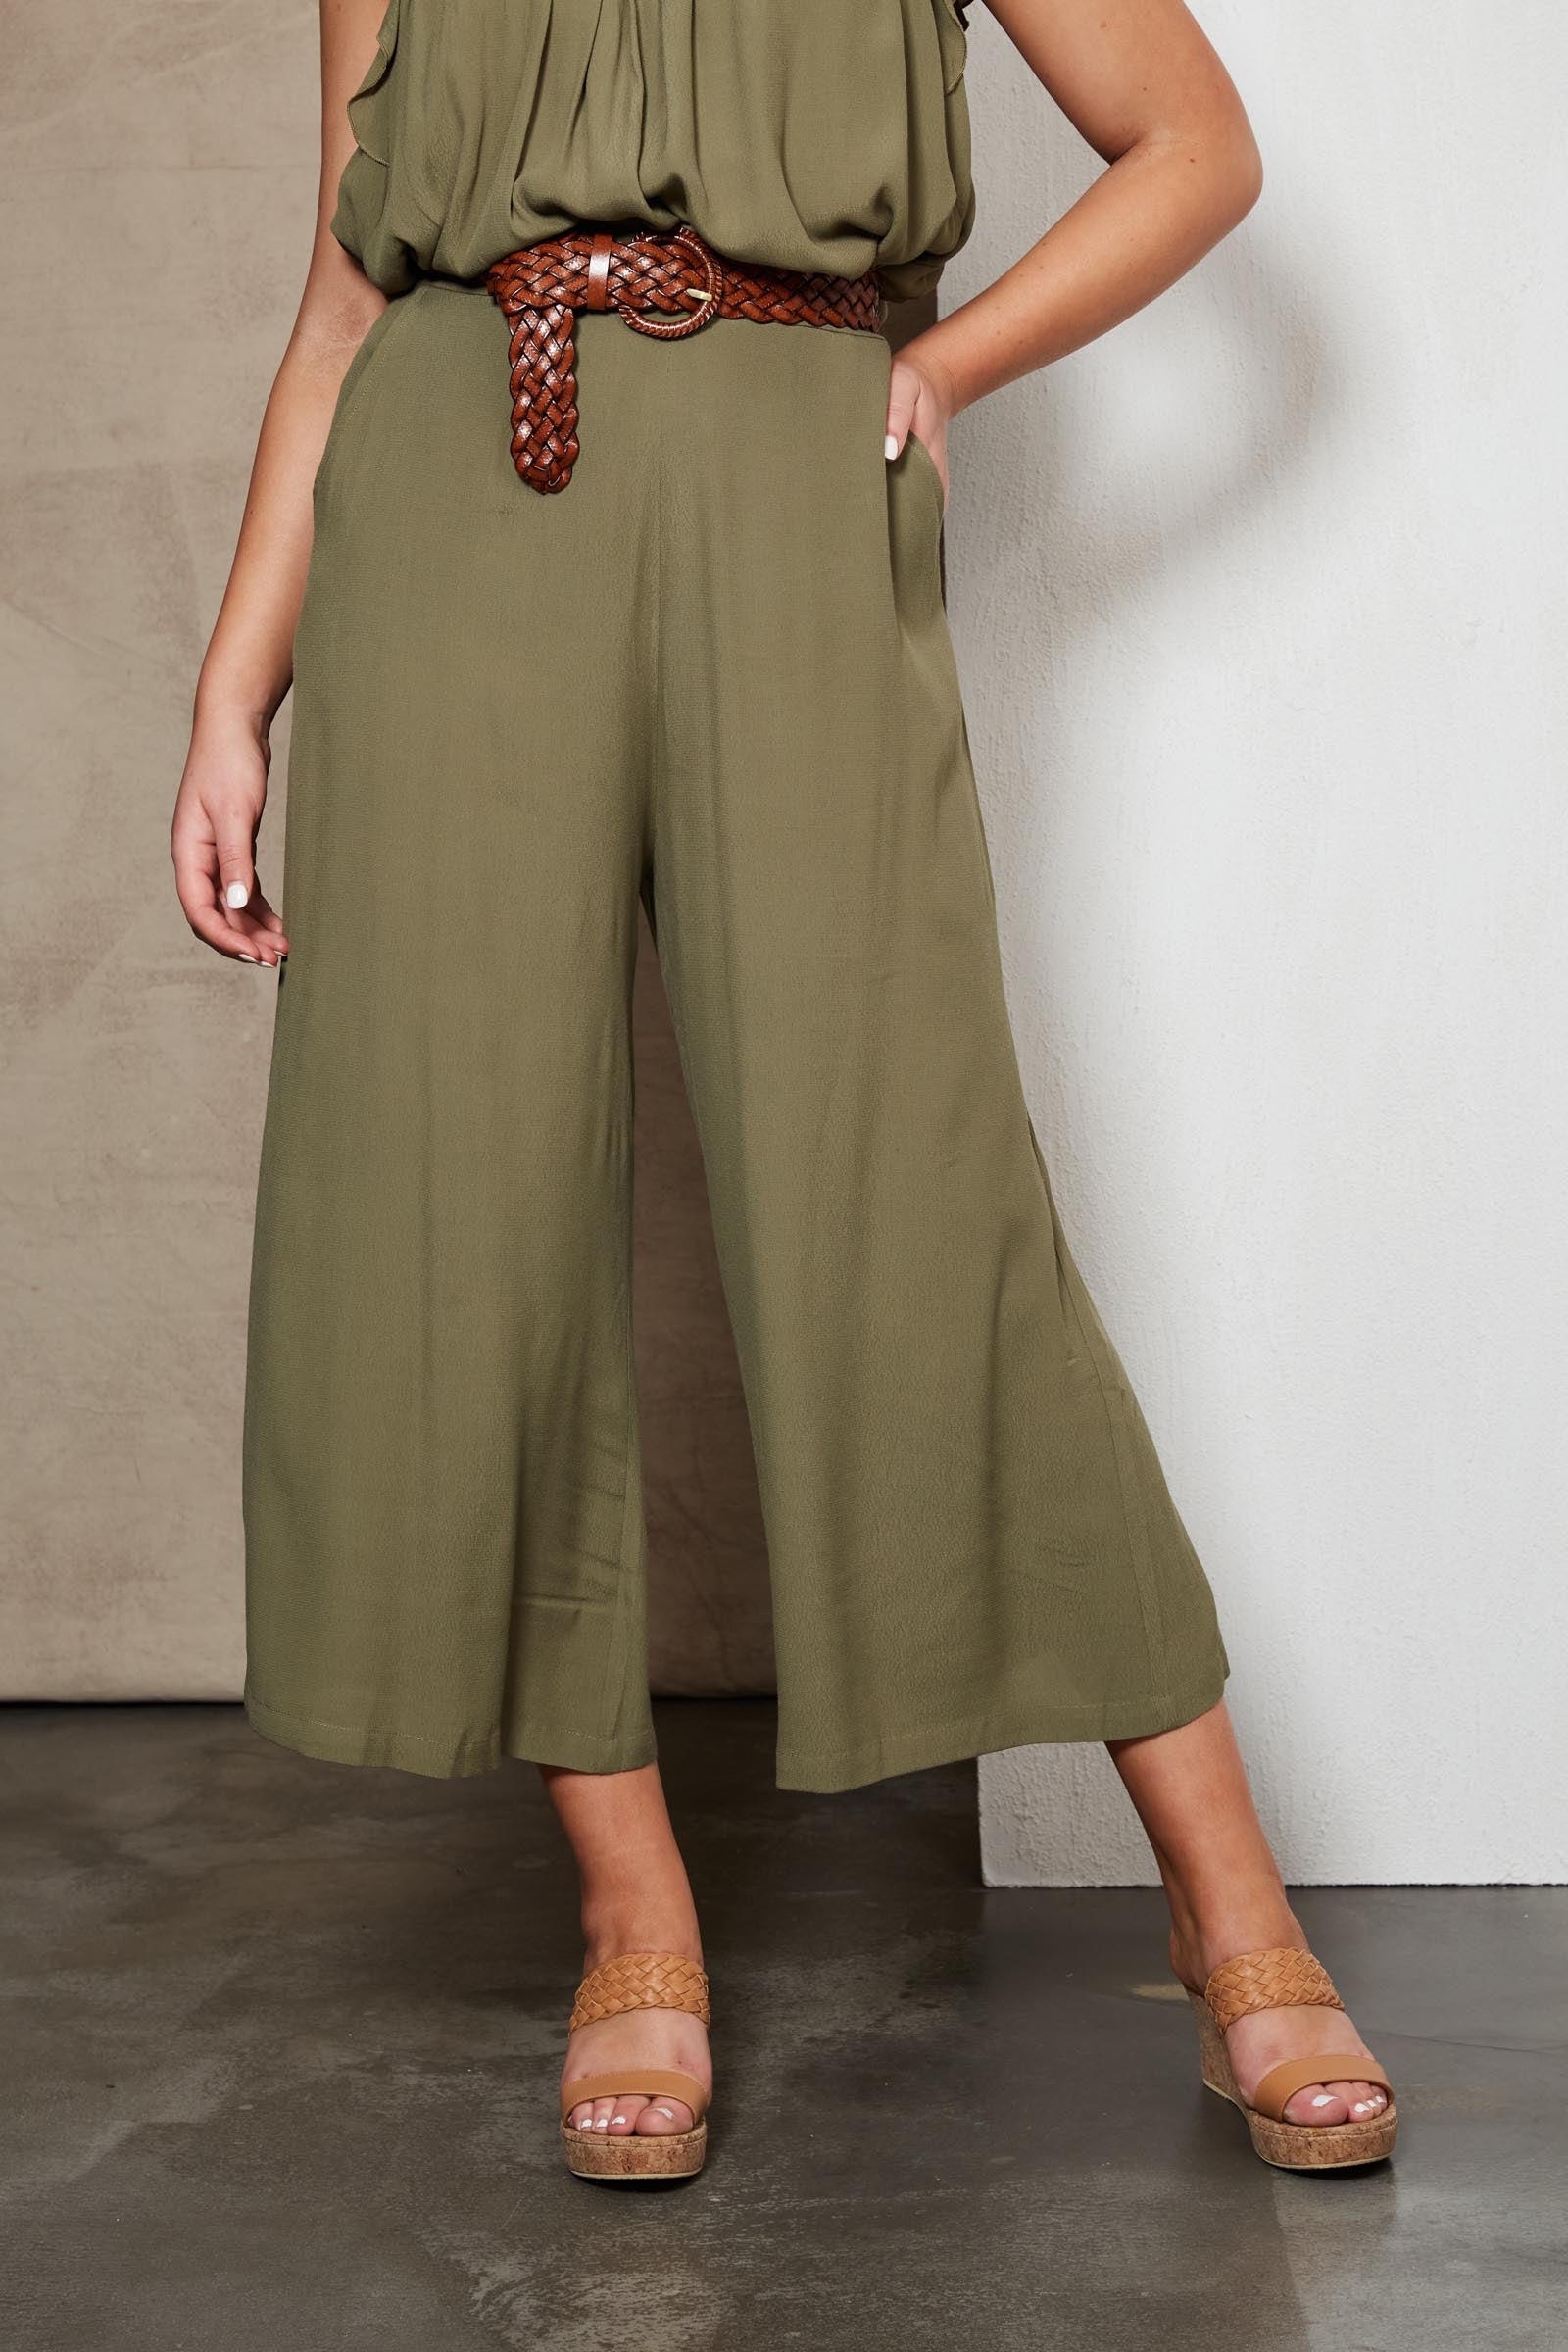 Plumeria Pant - Moss - eb&ive Clothing - Pant Relaxed Crop